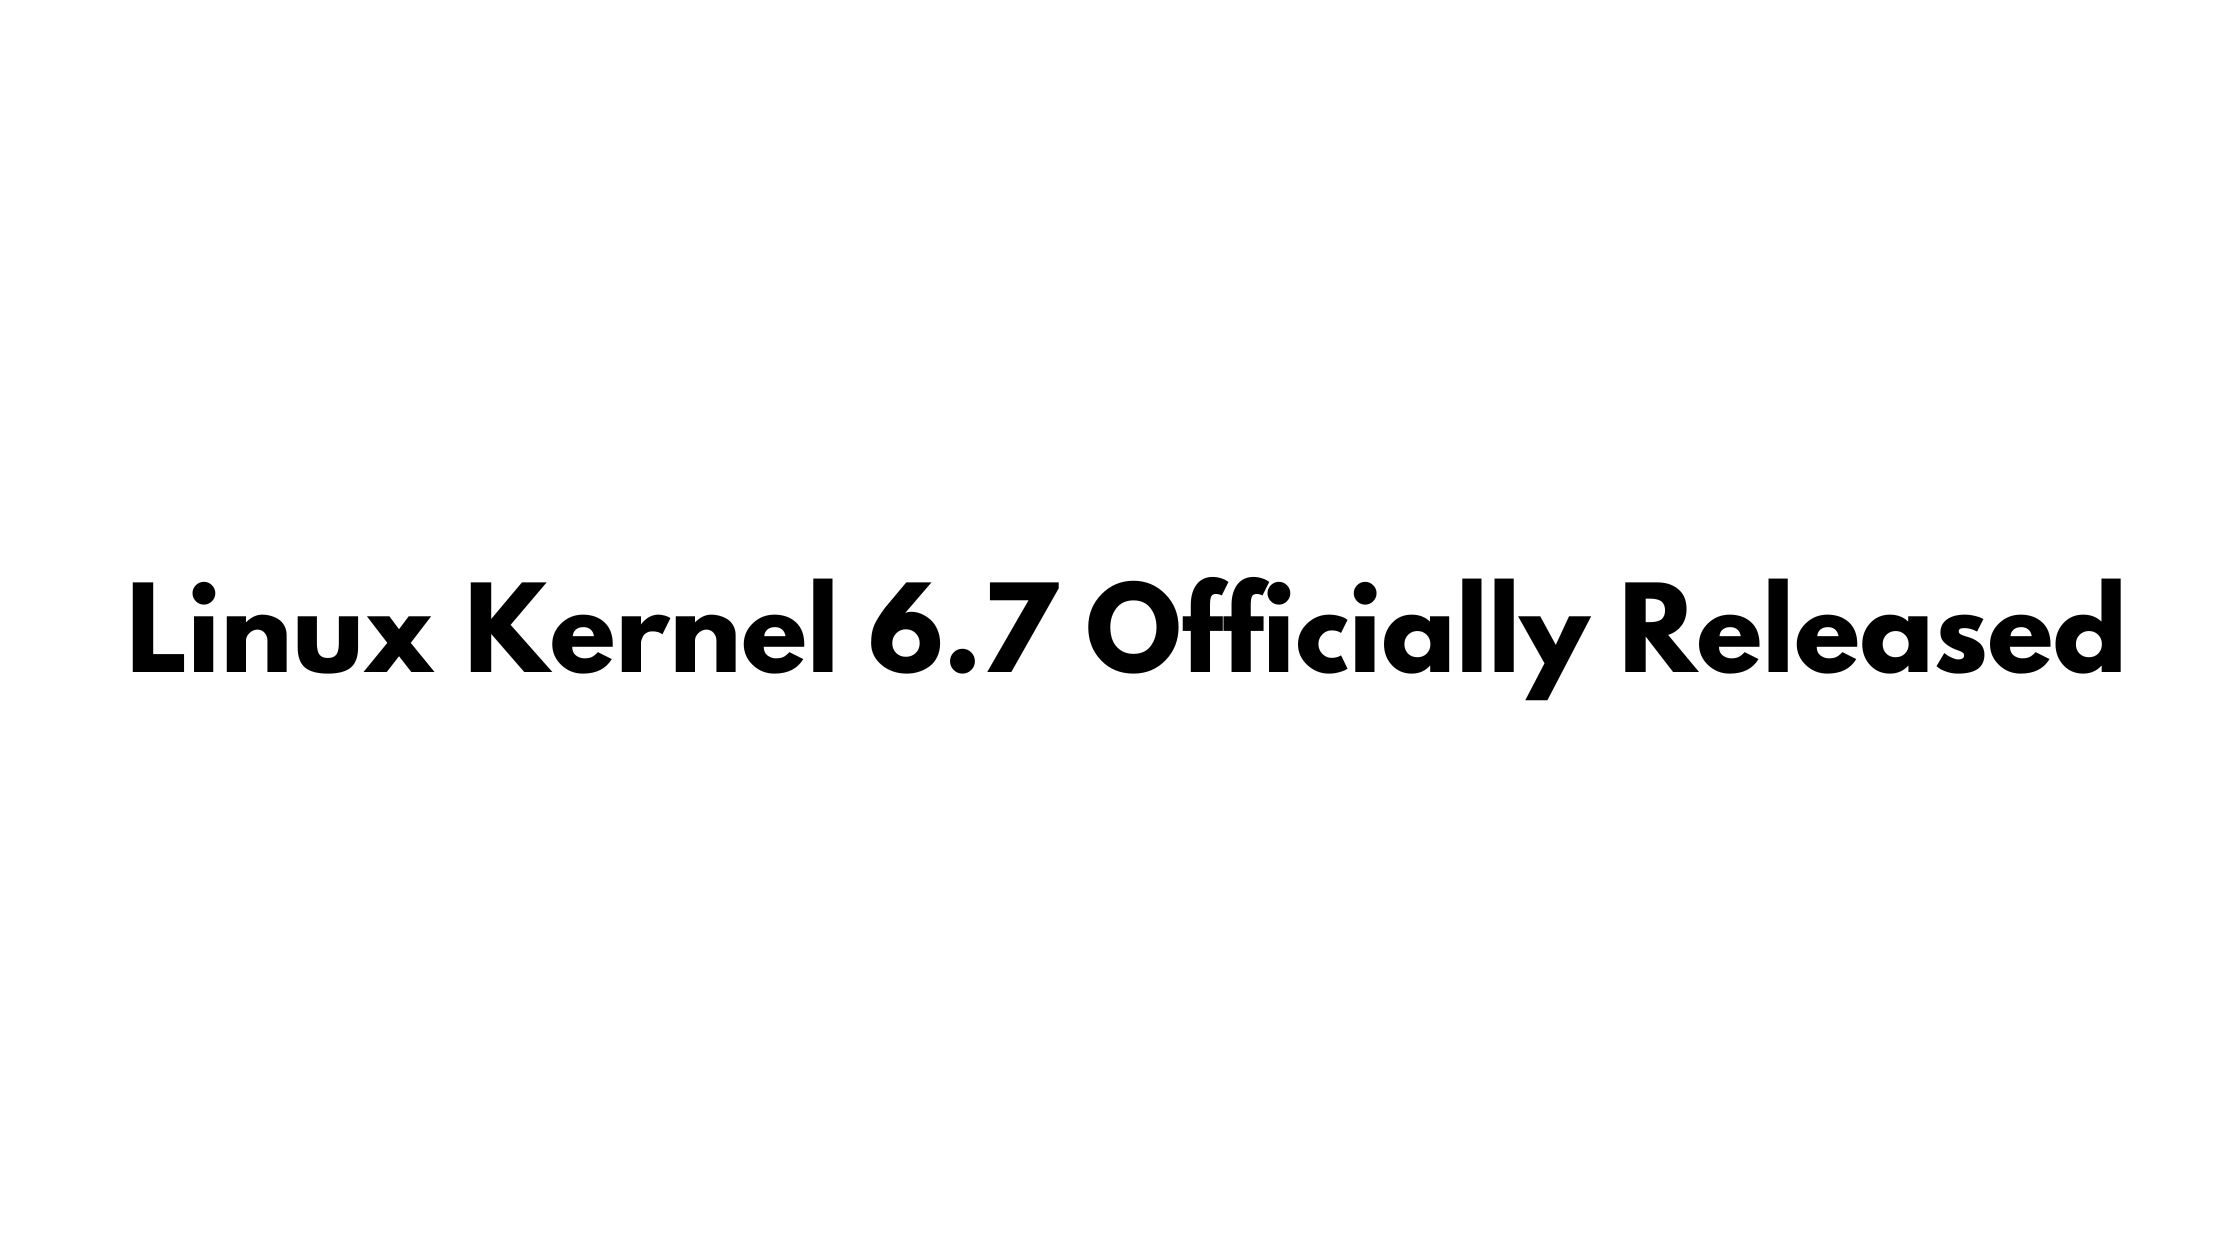 Linux Kernel 6.7 Officially Released